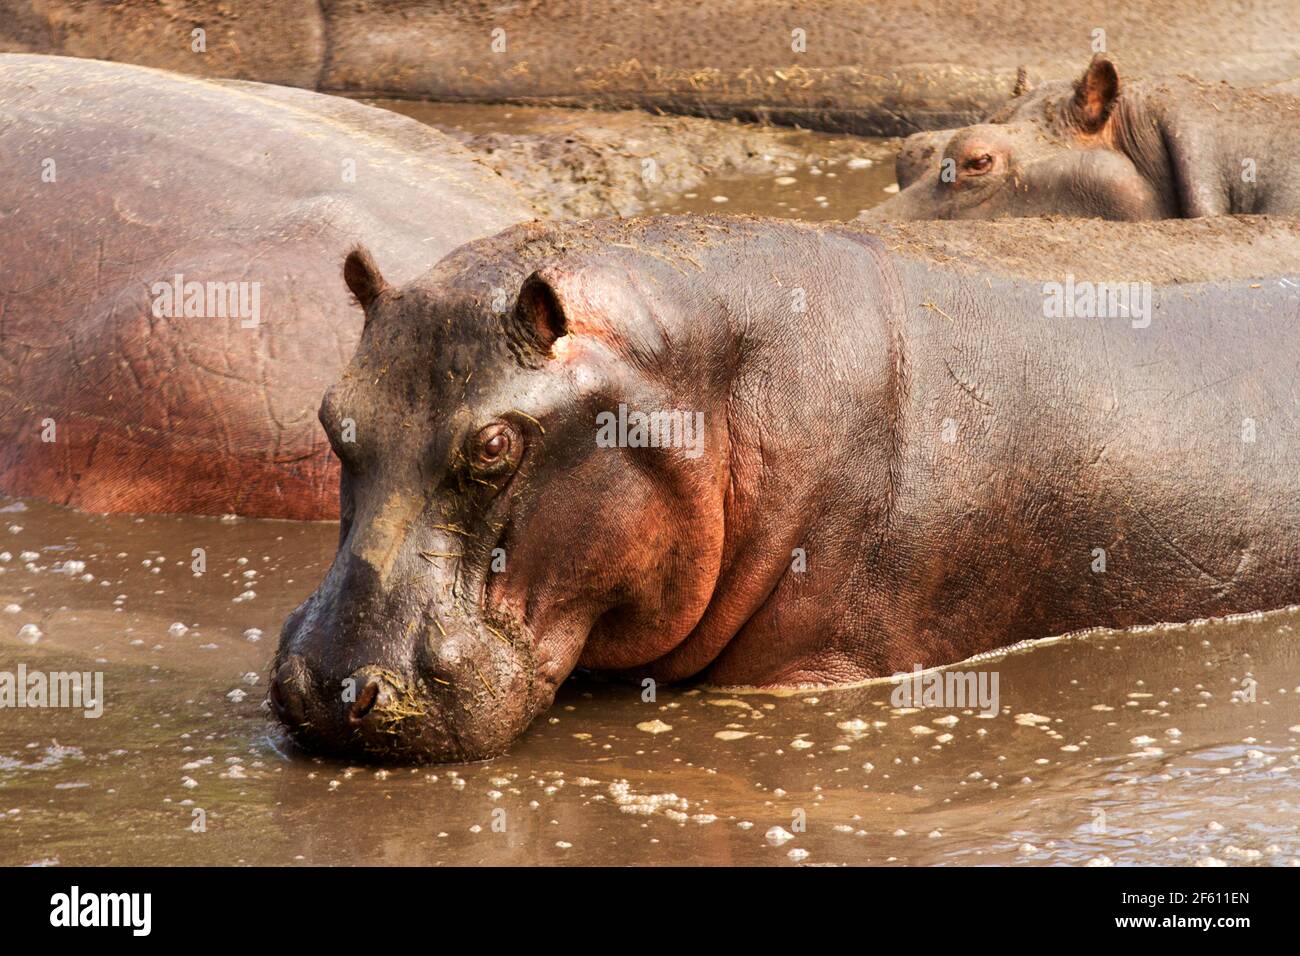 The year round spring at Ikuu Hippo Polls in Katavi National Park is a life-line for the areas hippos and can support the highest concentrations Stock Photo